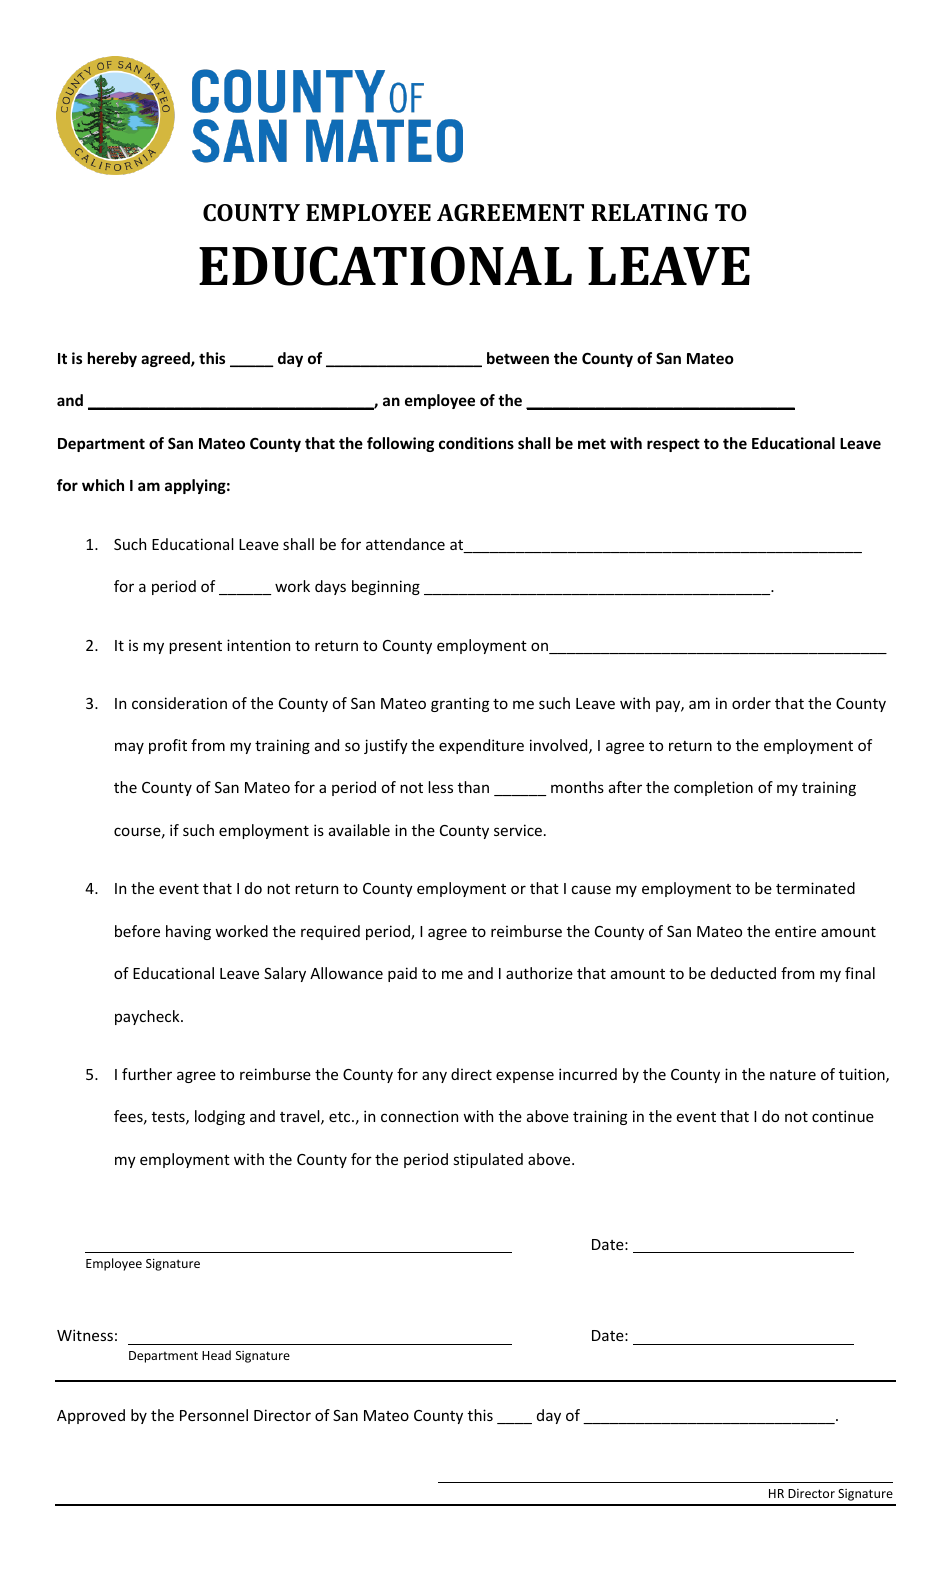 County Employee Agreement Relating to Educational Leave - County of San Mateo, California, Page 1